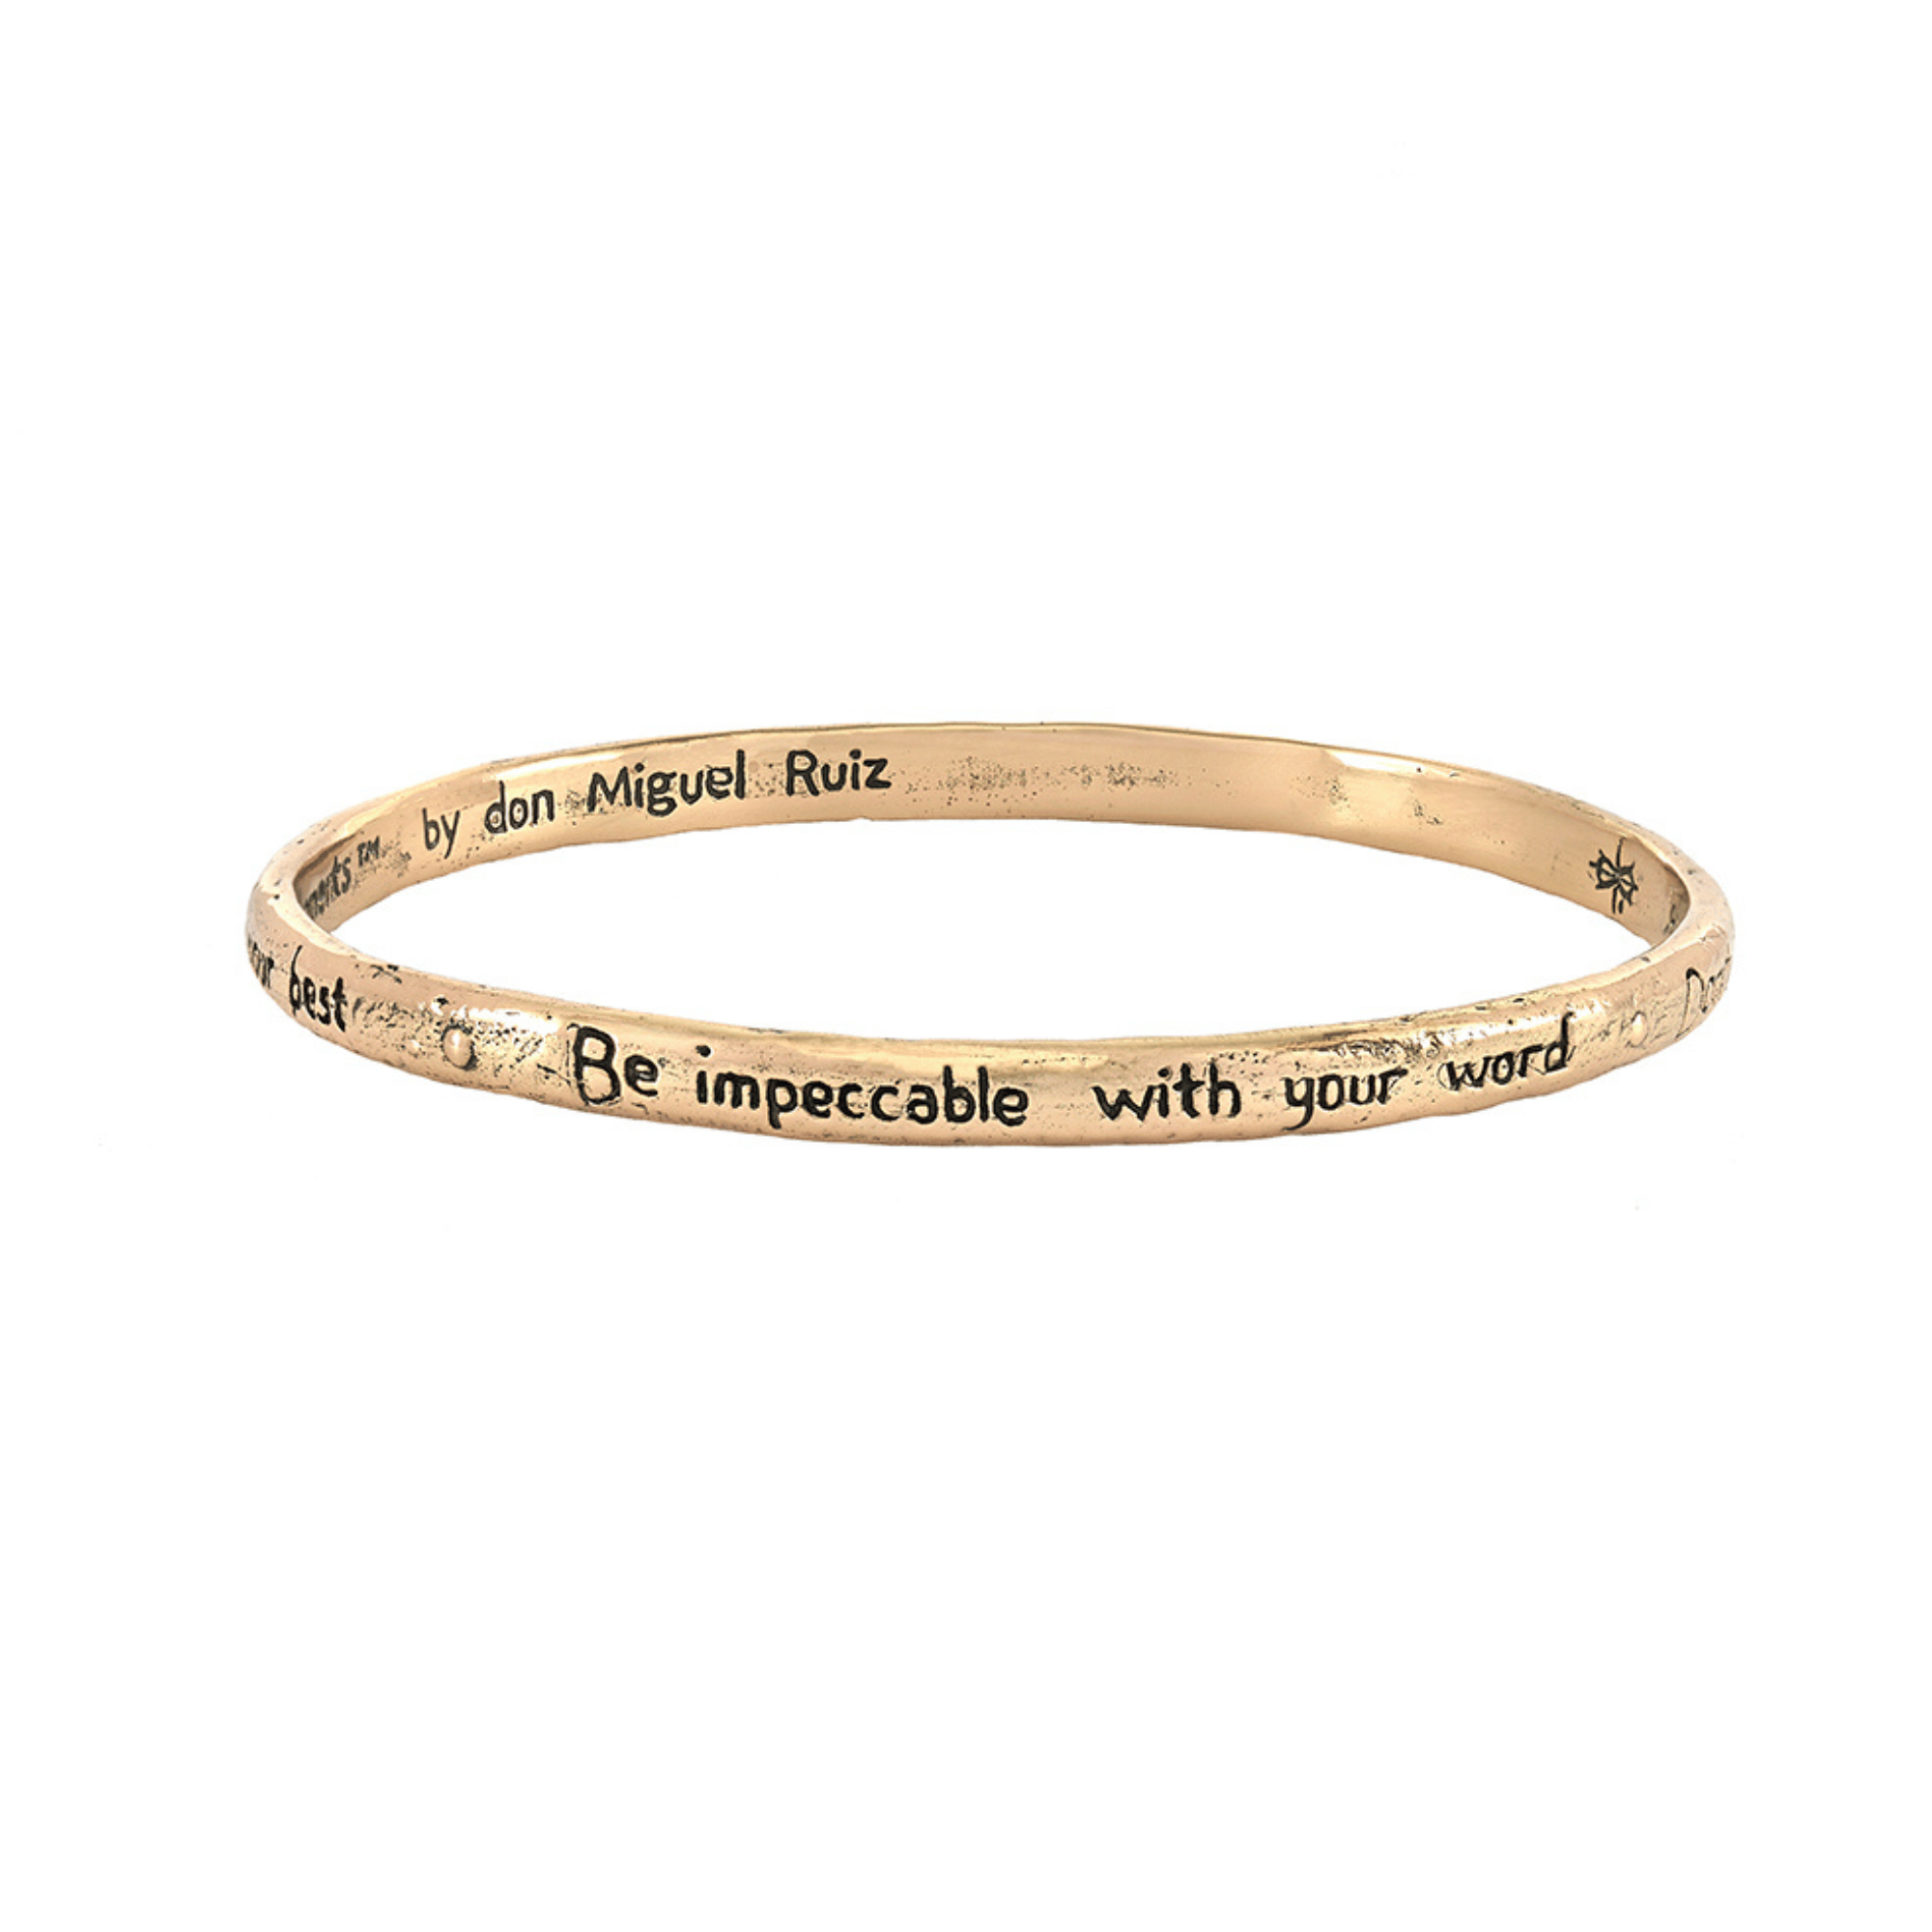 Jewelry Evolution8 Bracelet Small / Bronze The Four Agreements Bangle